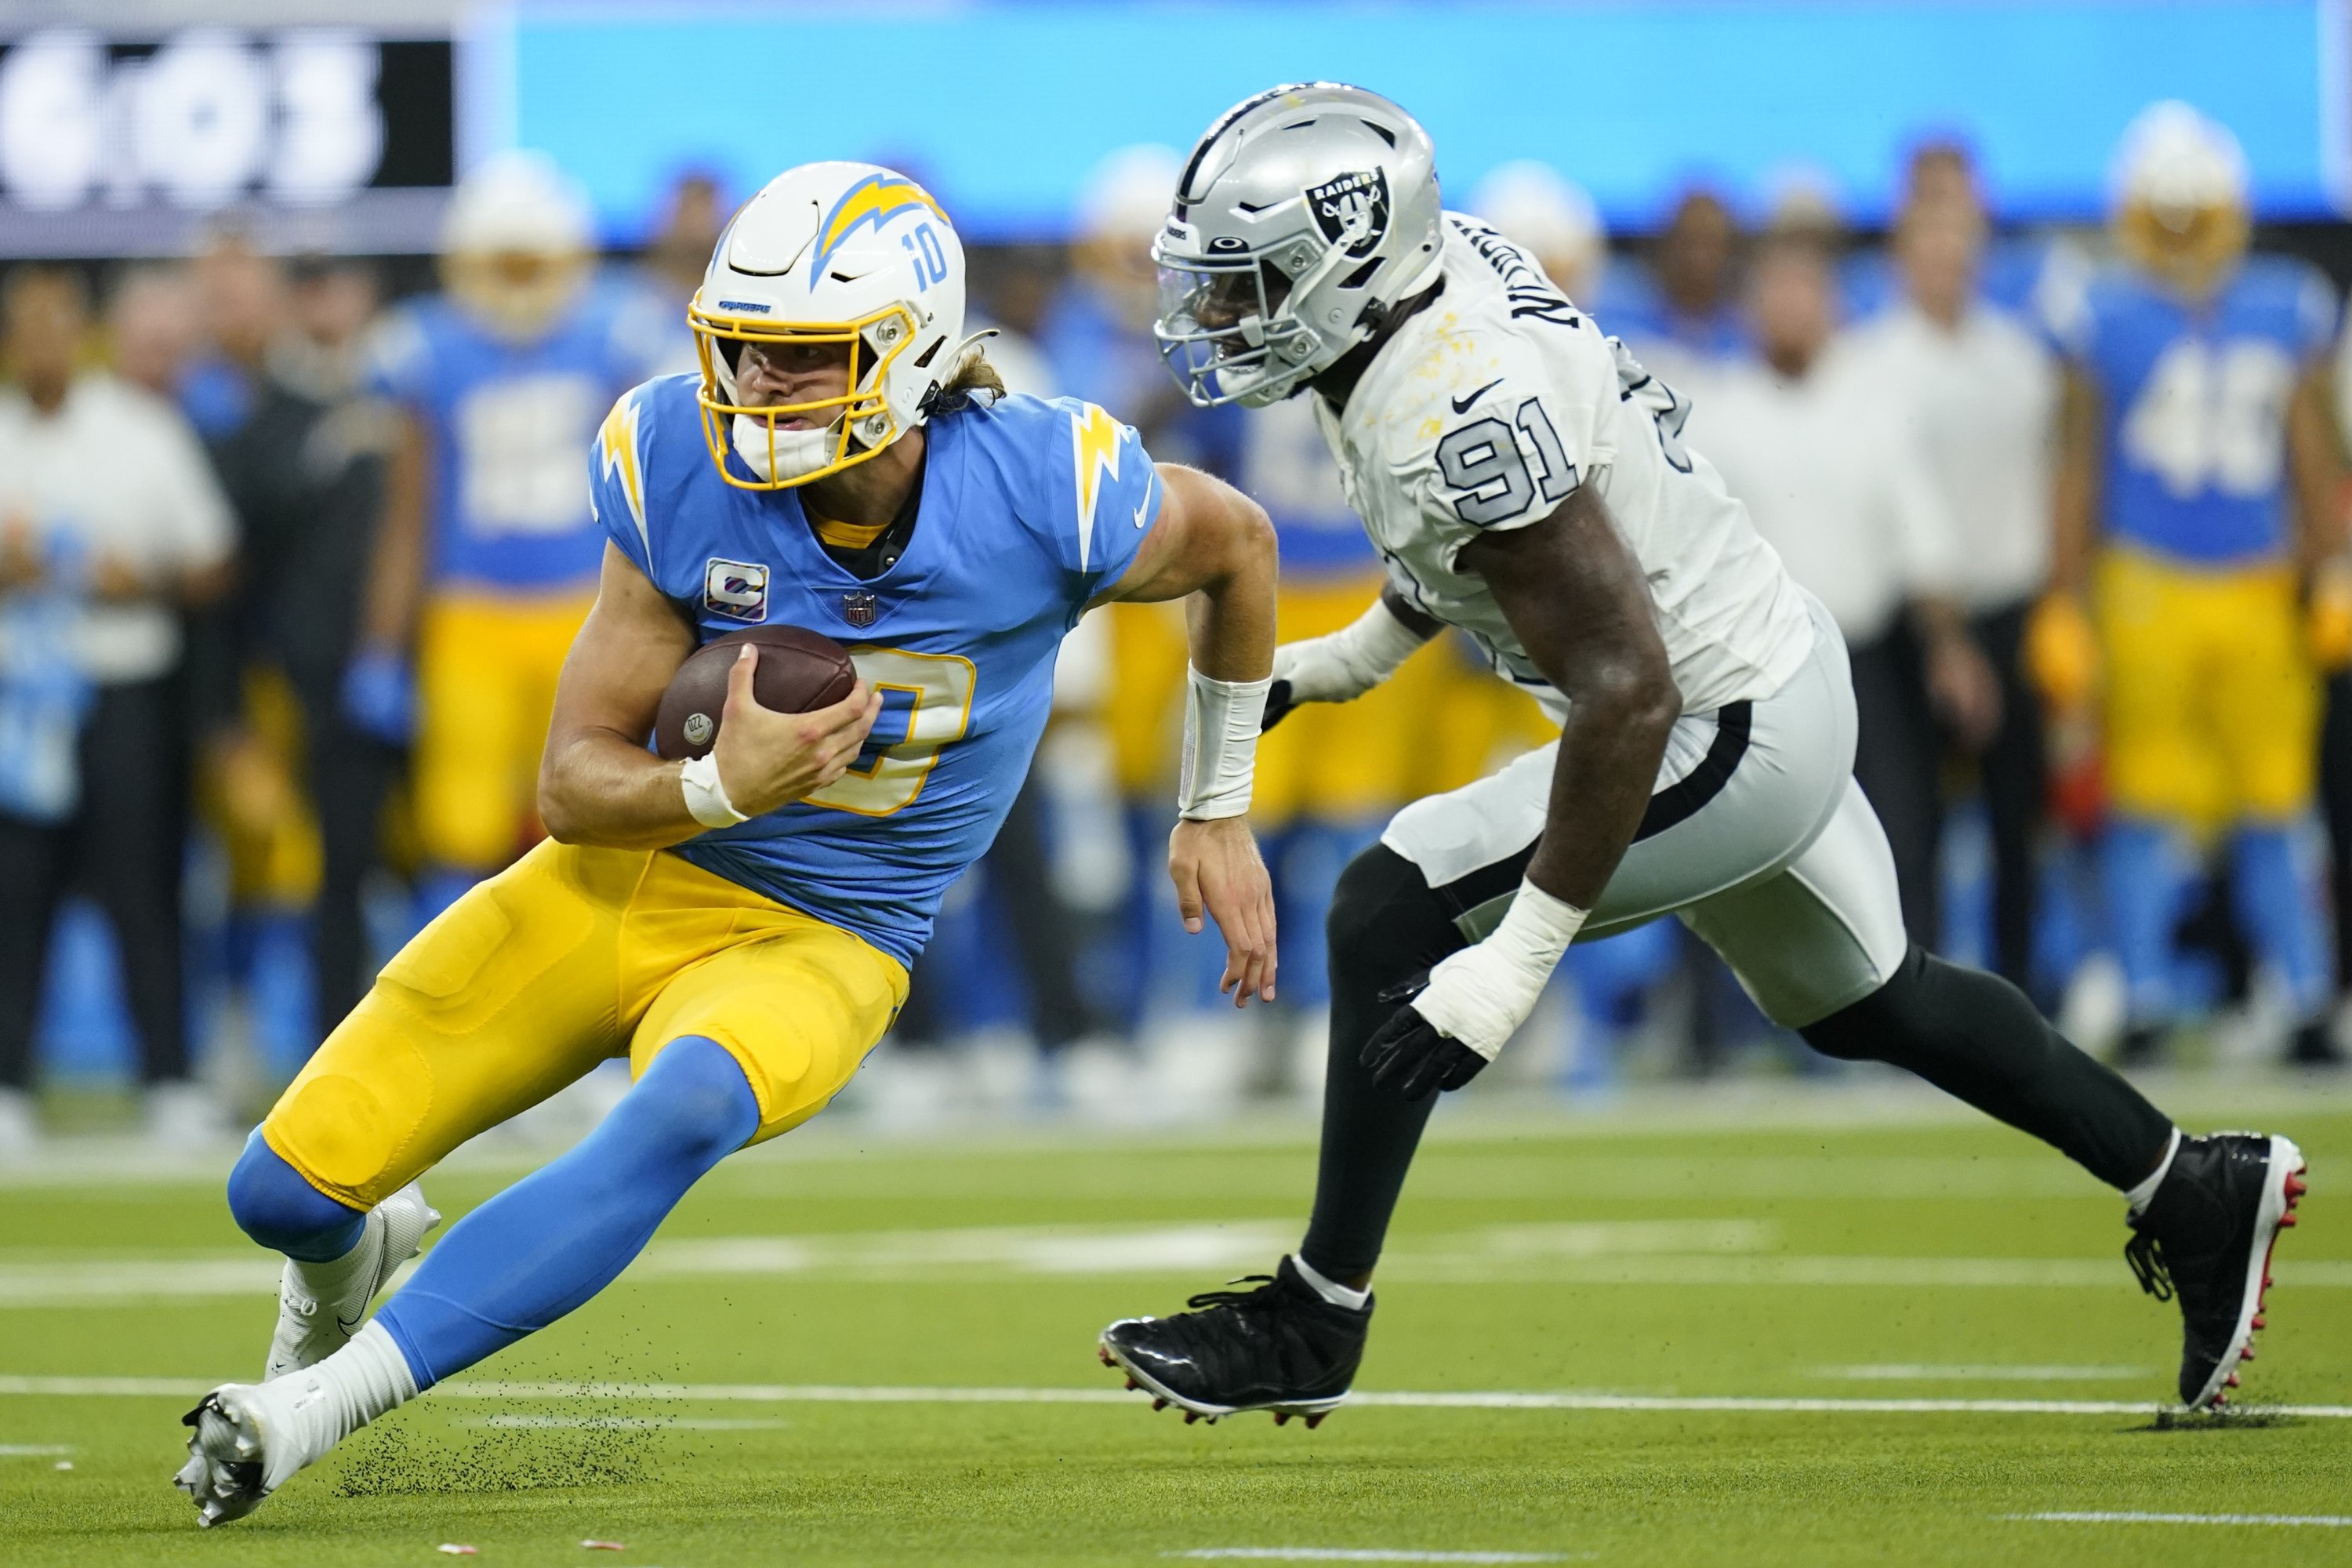 Limp 1st half dooms Raiders to 28-14 defeat at hands of Chargers